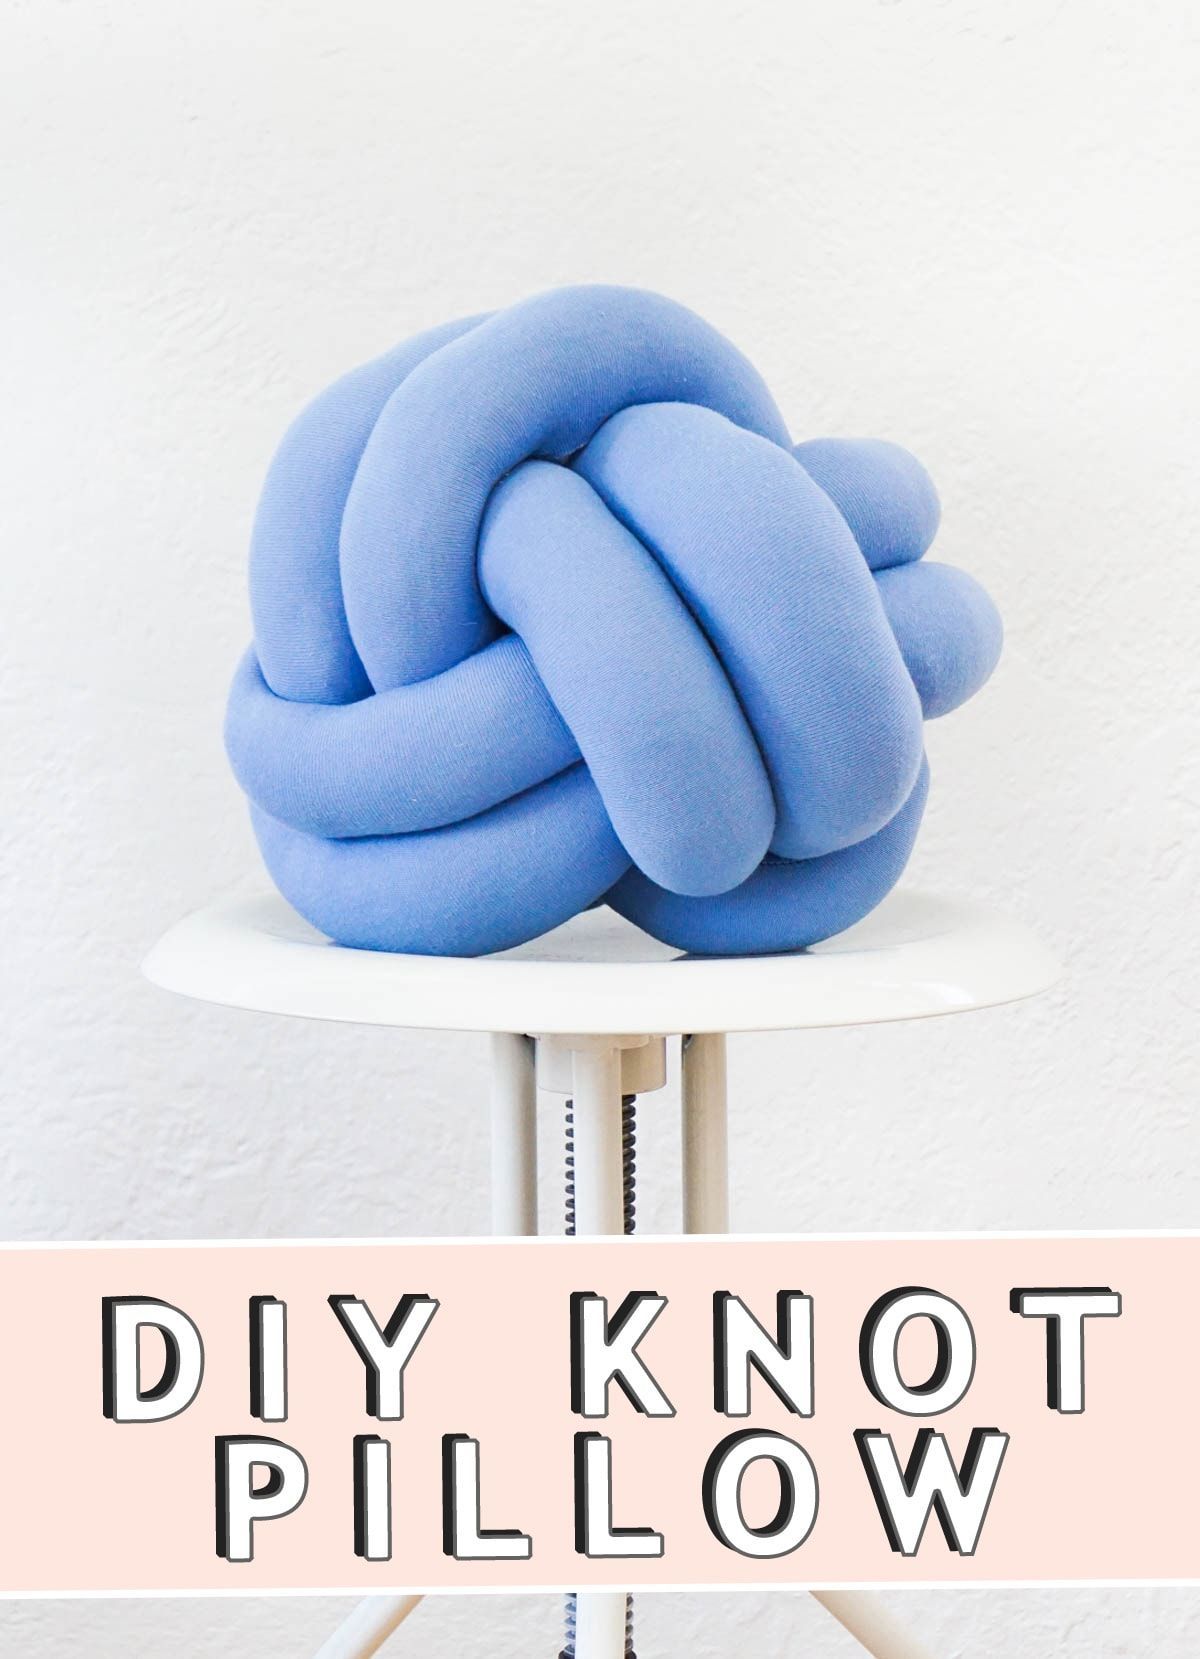 How to Make a DIY Knot Pillow Instructions | Sugar & Cloth - How to Make a DIY Knot Pillow Instructions | Sugar & Cloth -   diy Pillows designs